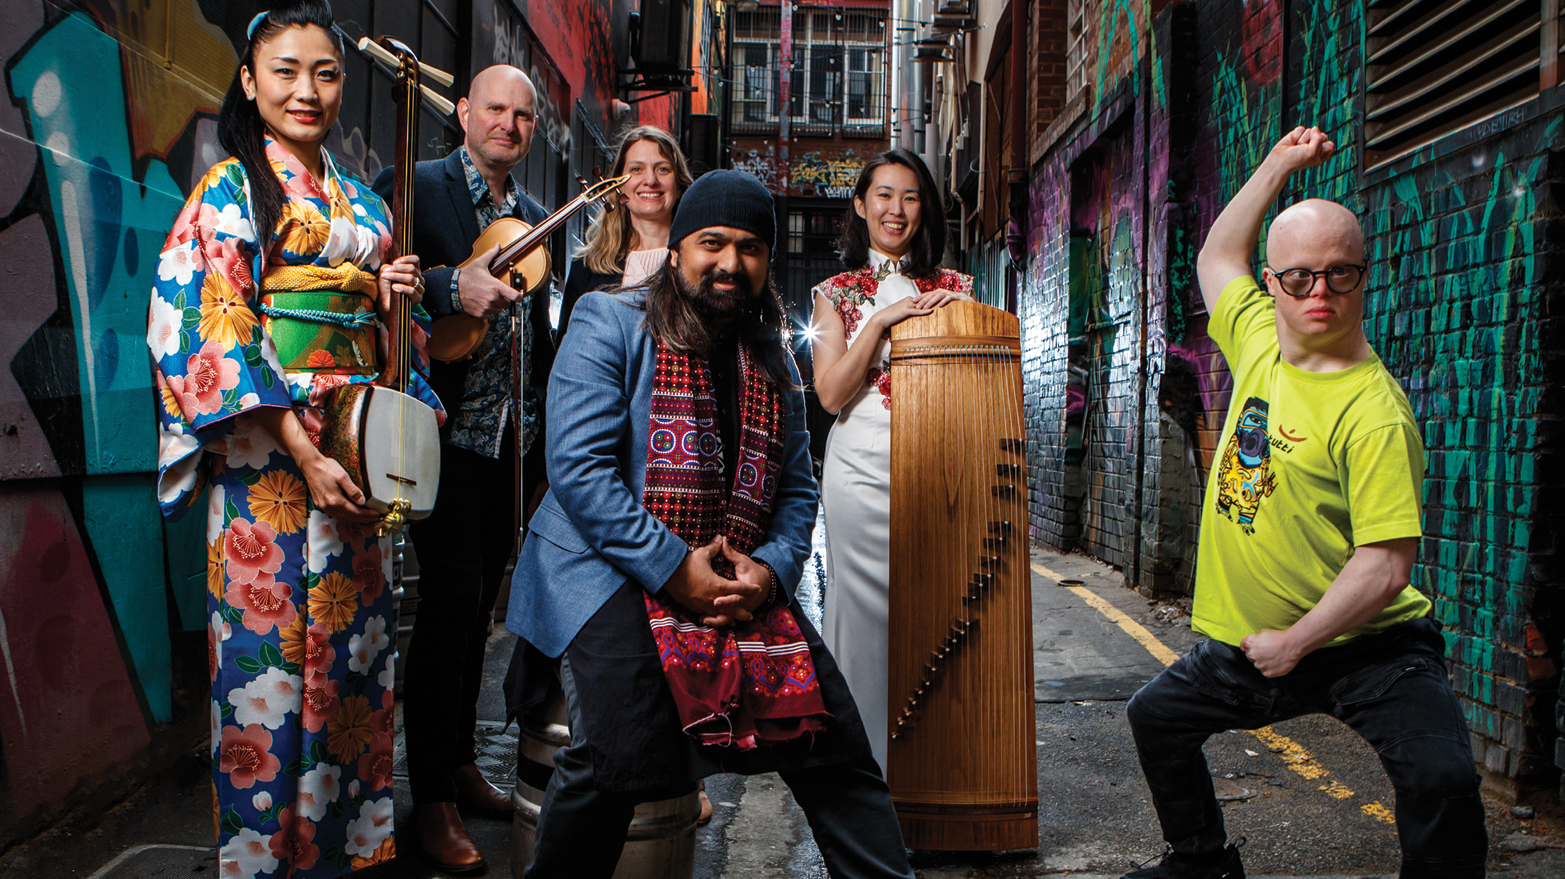 Musicians of the Adelaide Symphony Orchestra posing with their instruments in an alley.